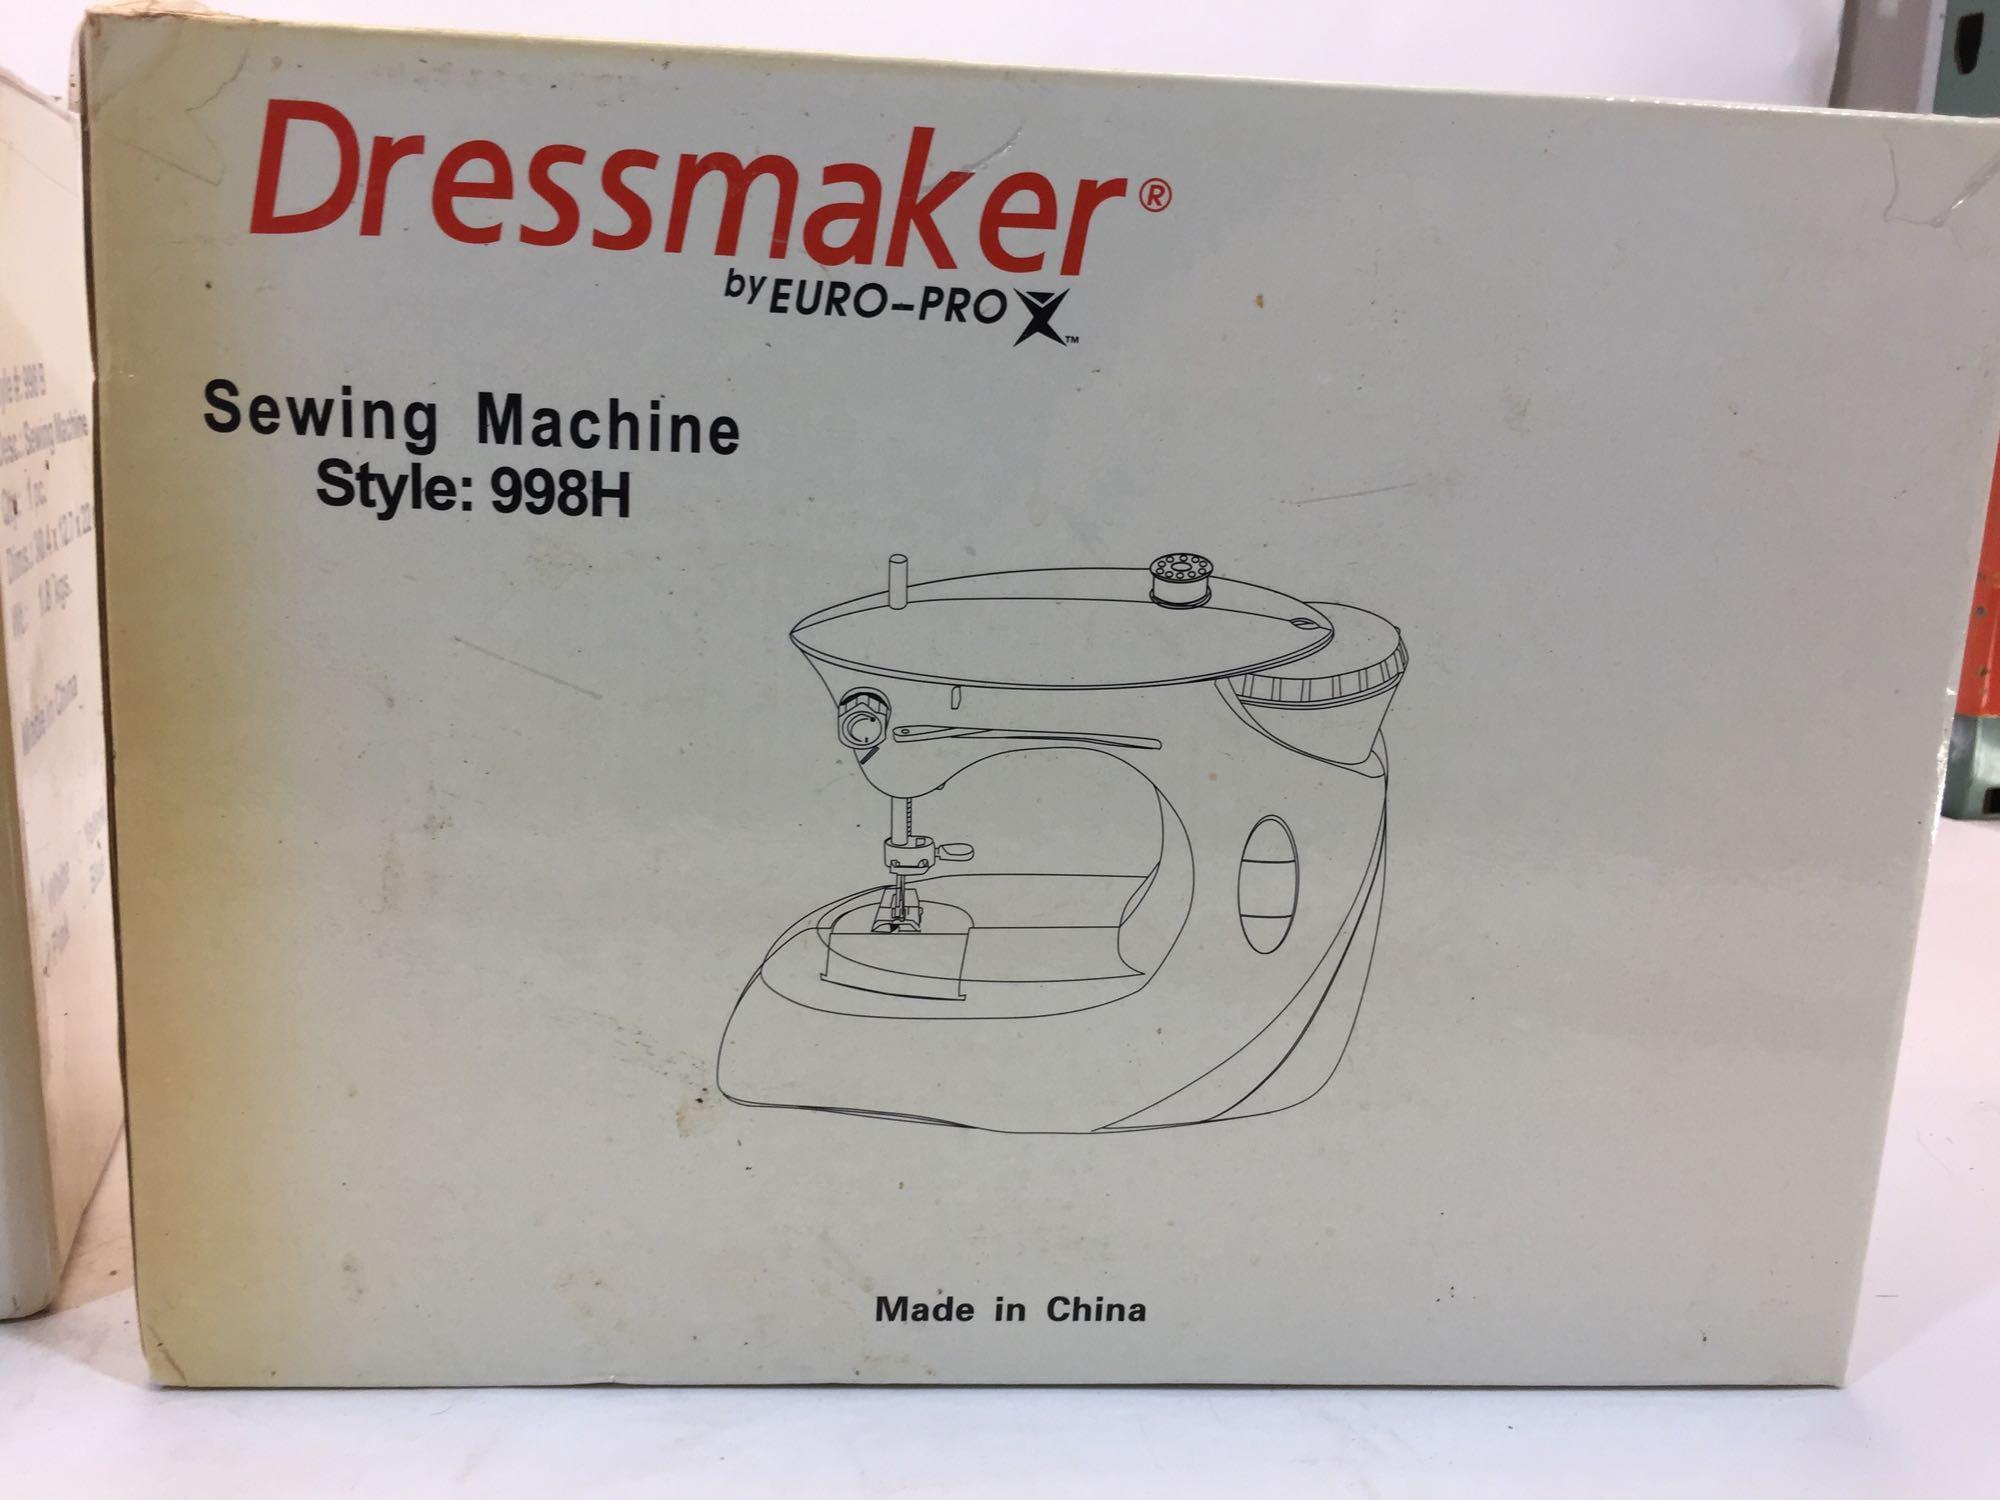 2 Dressmaker Sewing Machines by Euro-Pro - Untested